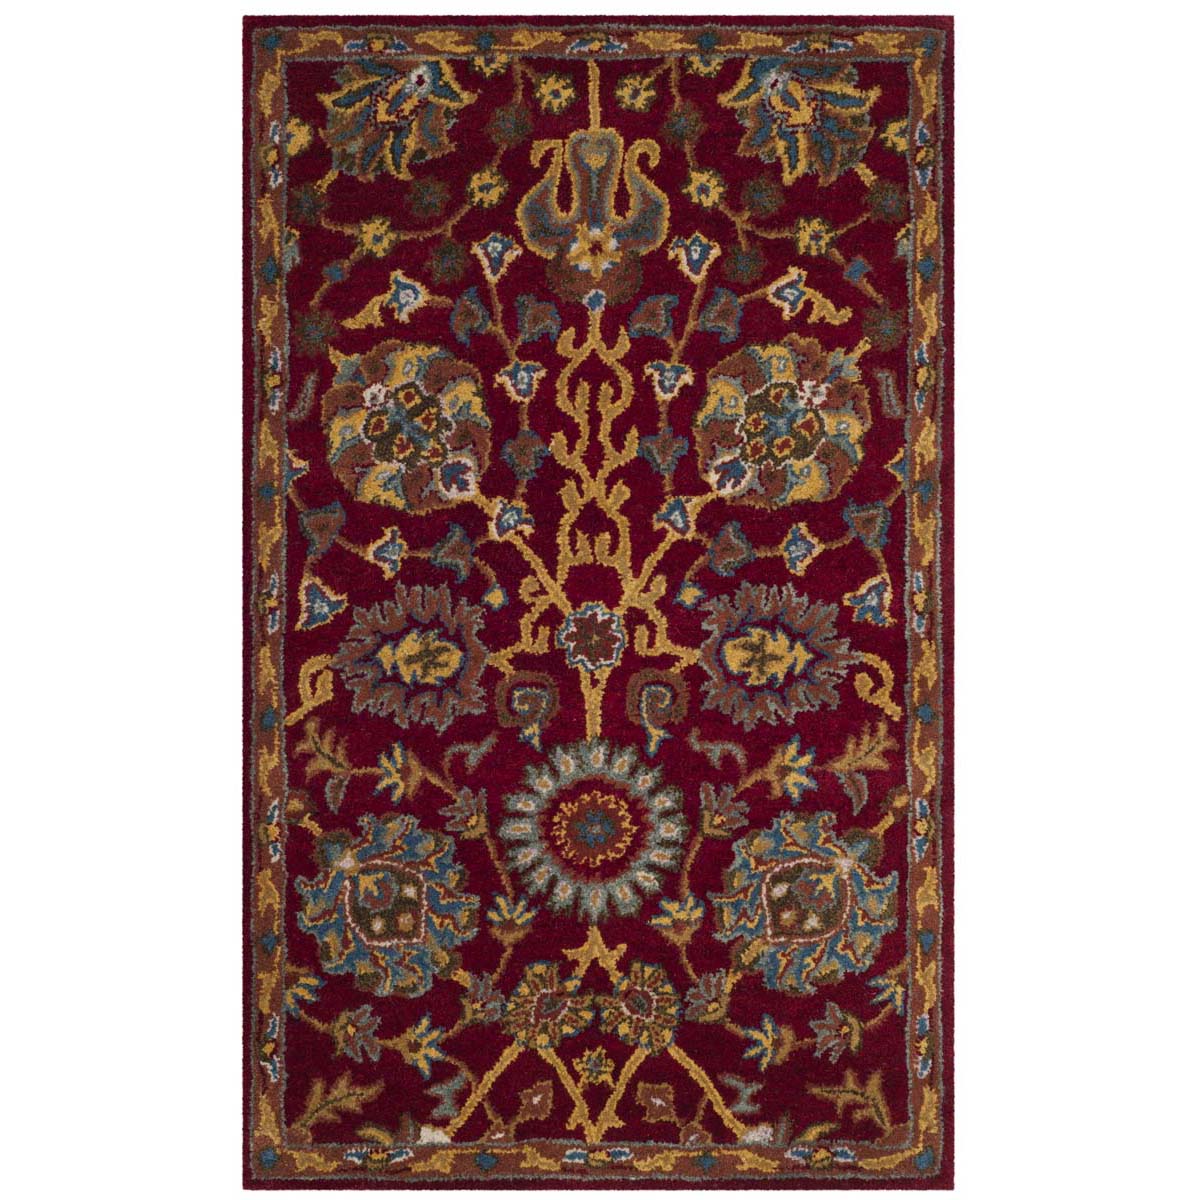 Safavieh Heritage 55A Rug, HG655A - Red